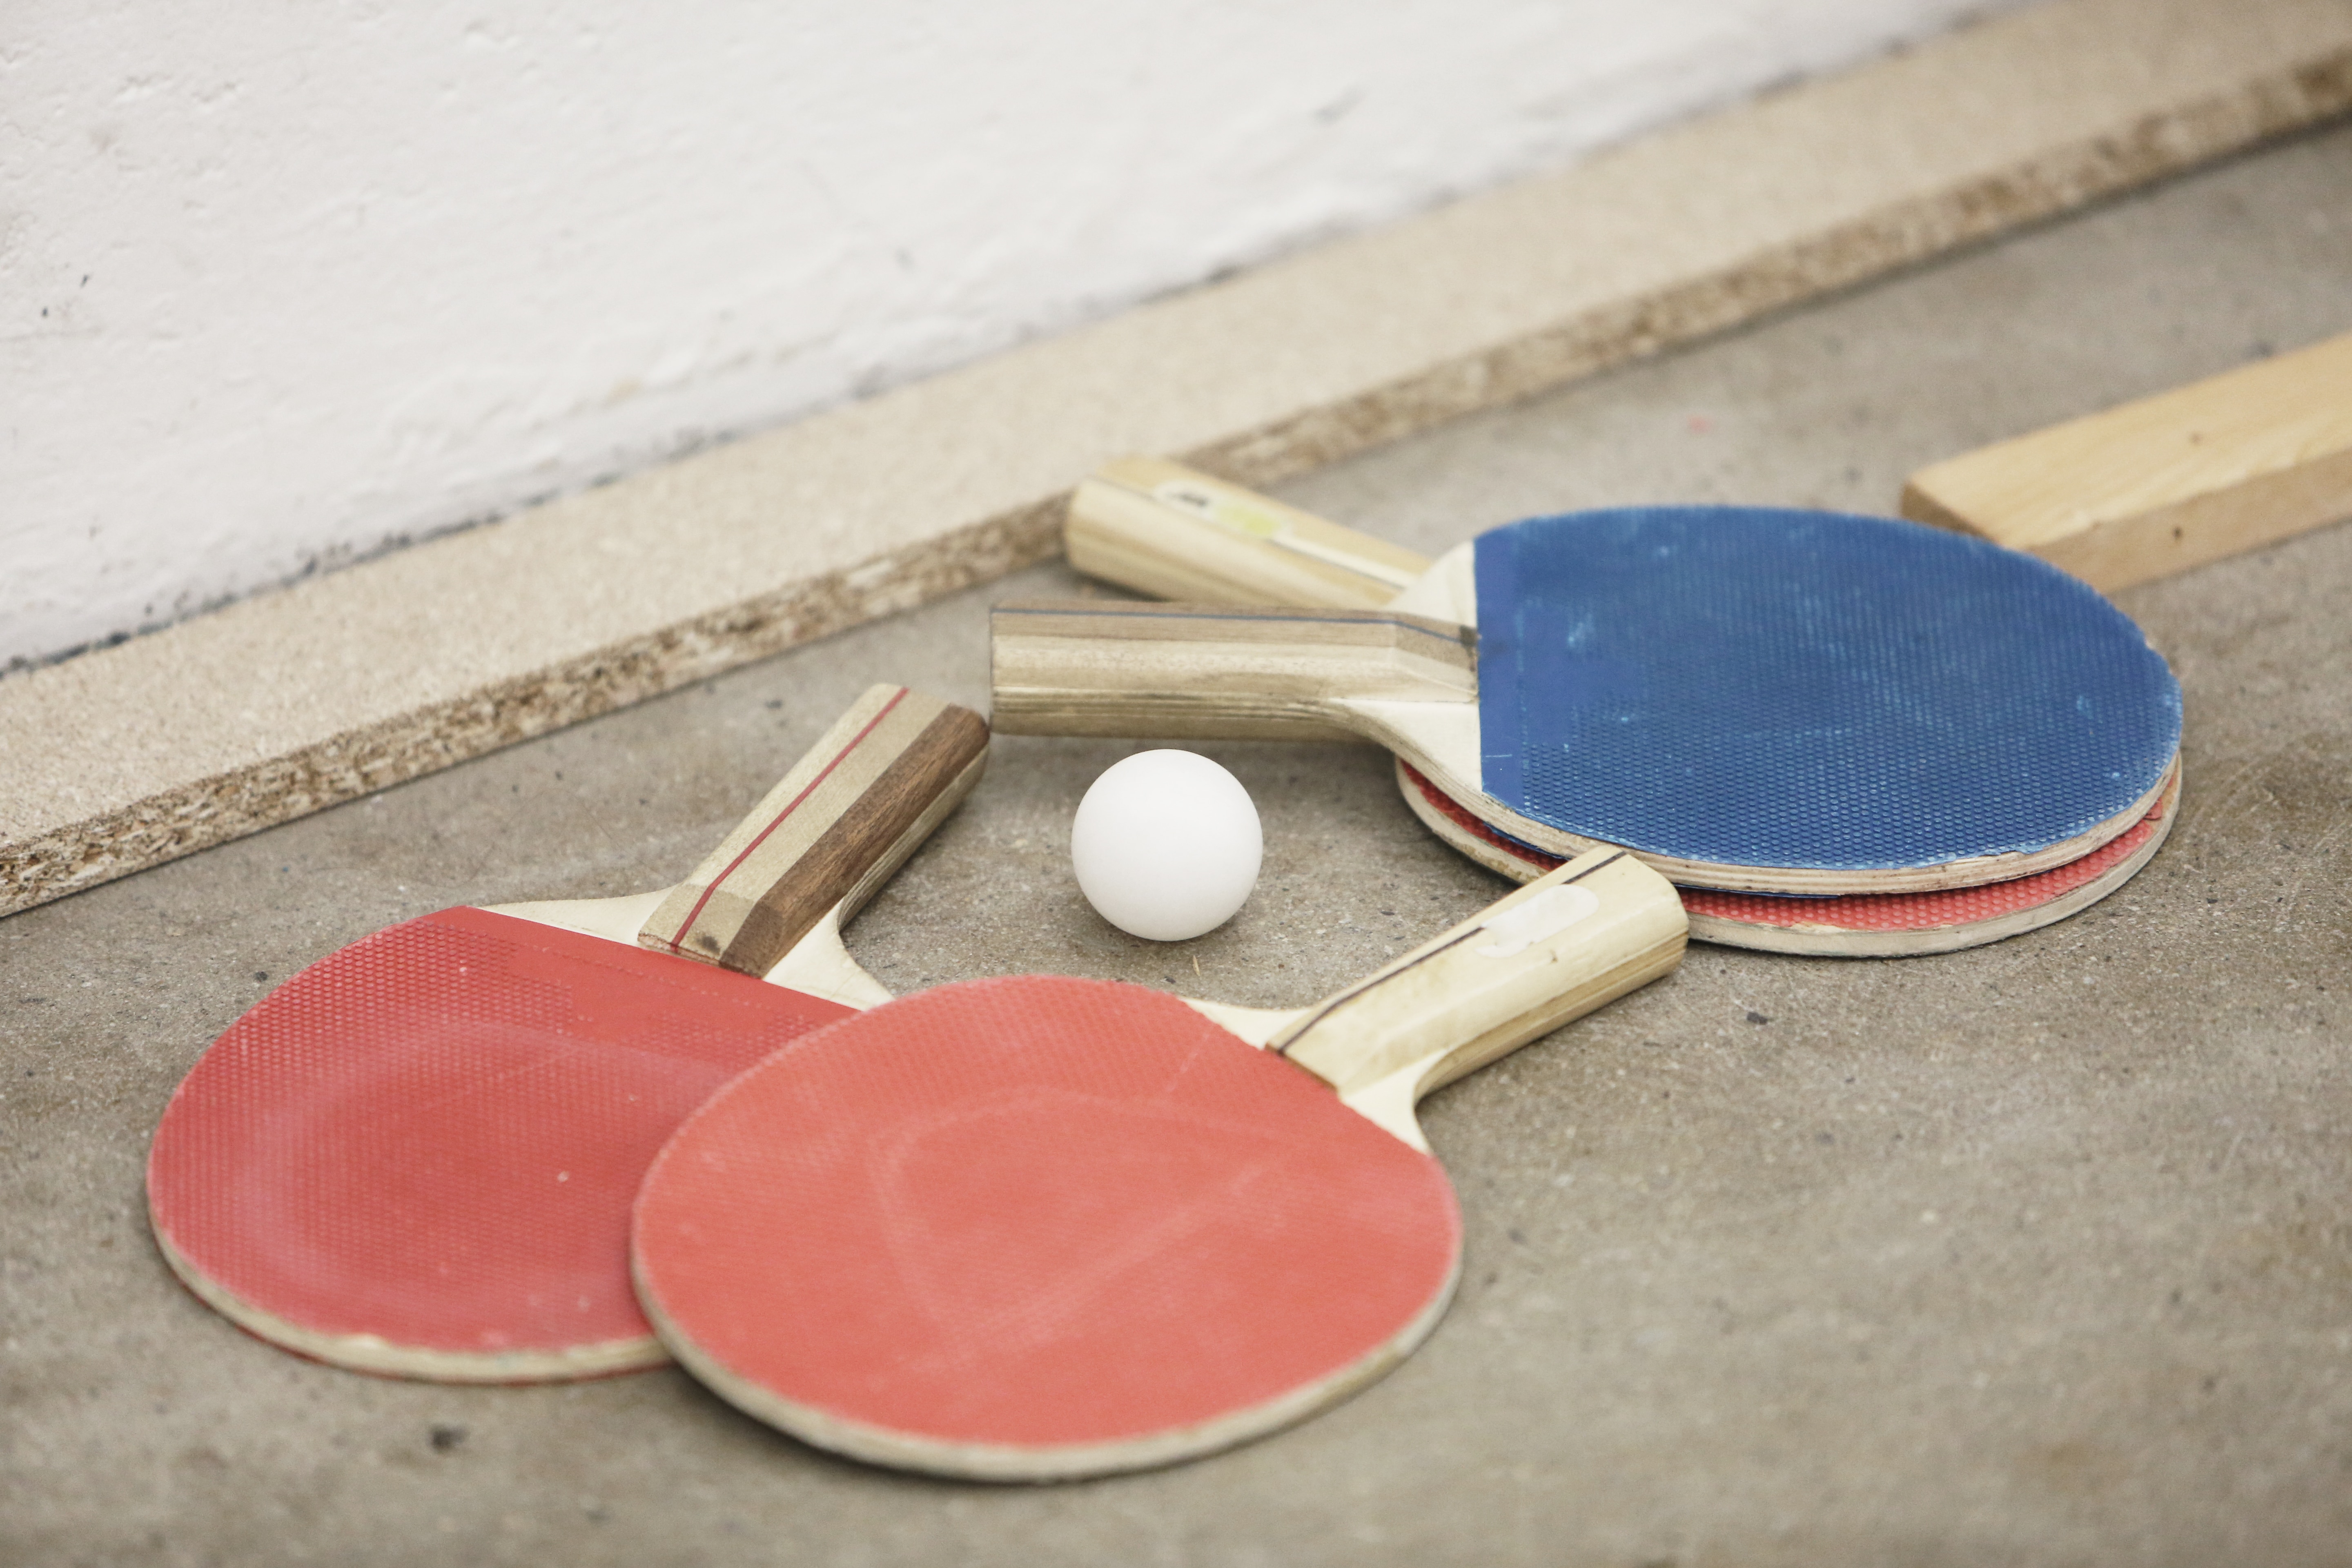 Download Original Image Online Crop - Worn Out Table Tennis Rubber , HD Wallpaper & Backgrounds